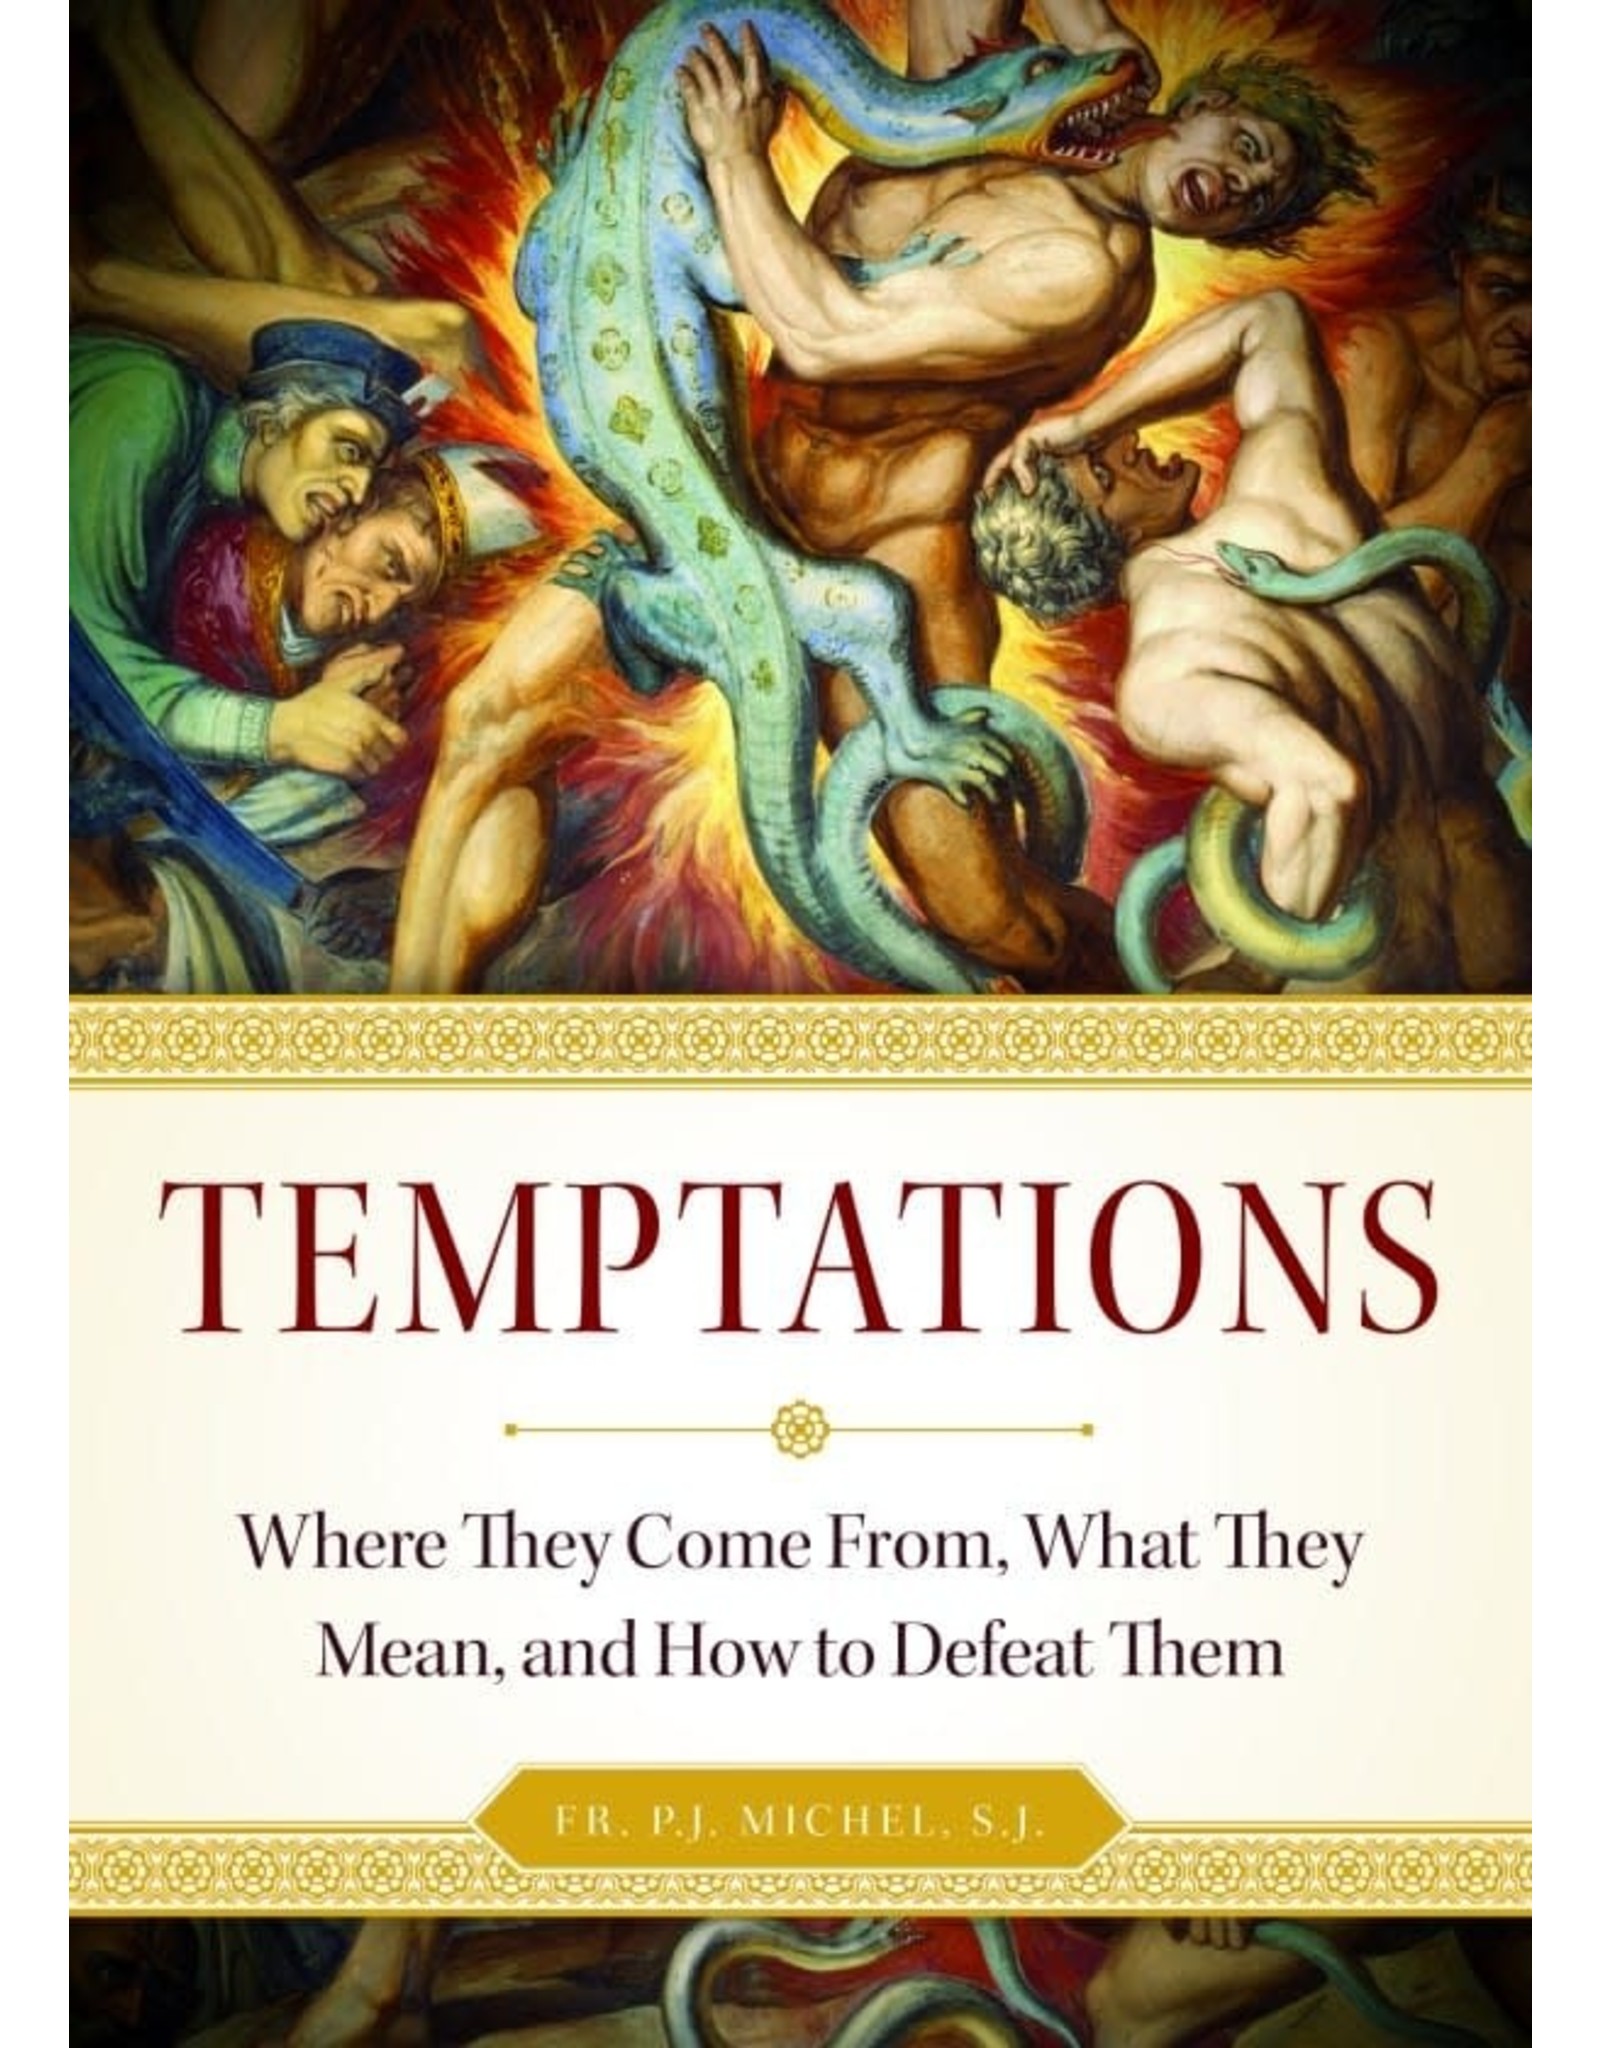 Sophia Press Temptations: Where They Come From, What They Mean, and How to Defeat Them by Fr. P.J. Michel, S.J (Paperback)